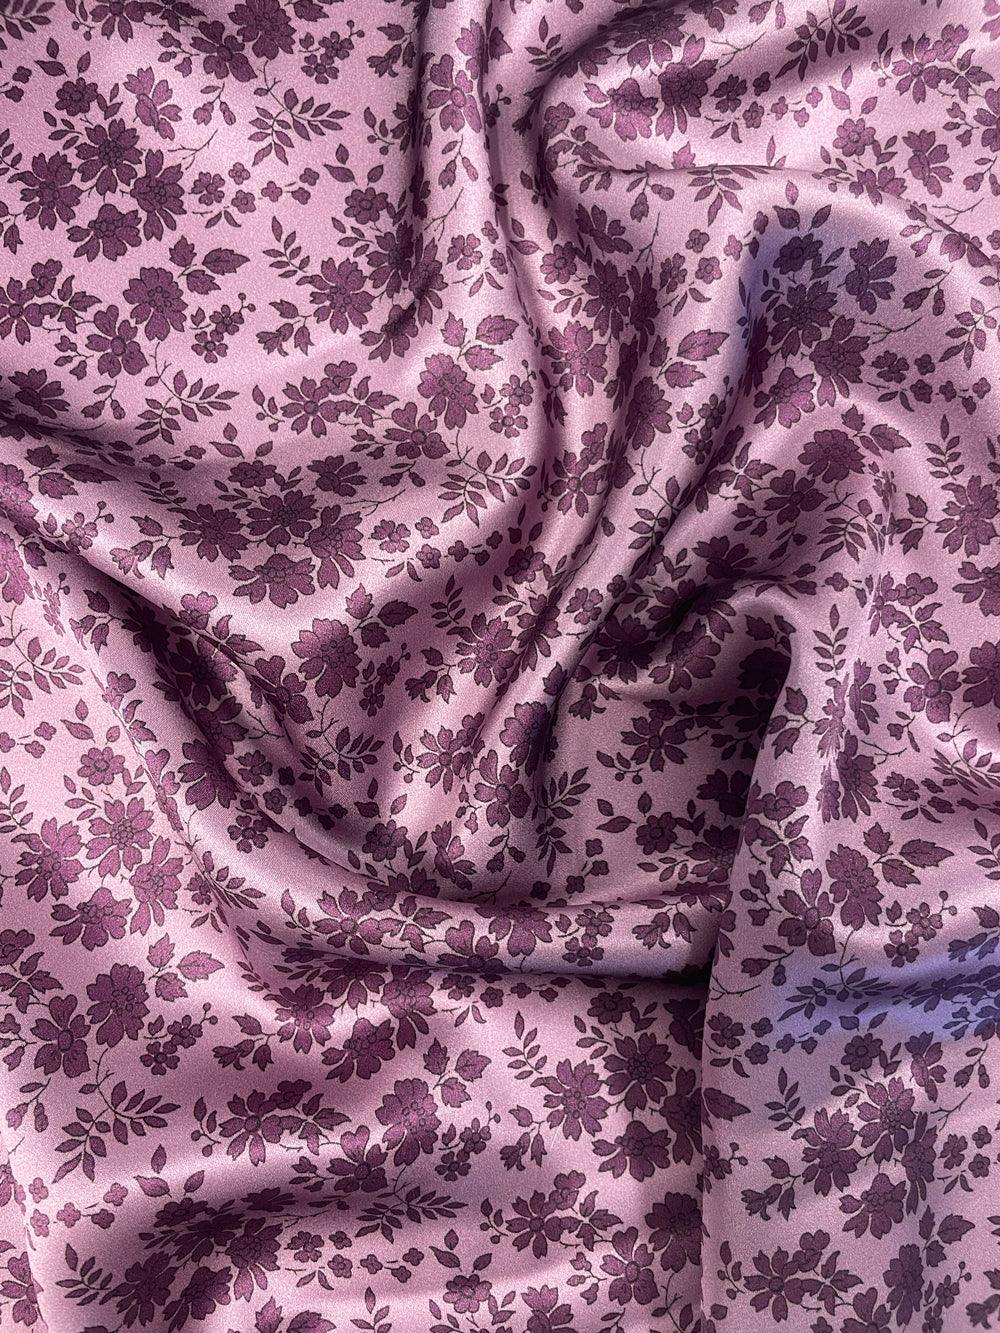 Silk Pillowcase made with Liberty Fabric CAPEL AUBERGINE - Coco & Wolf